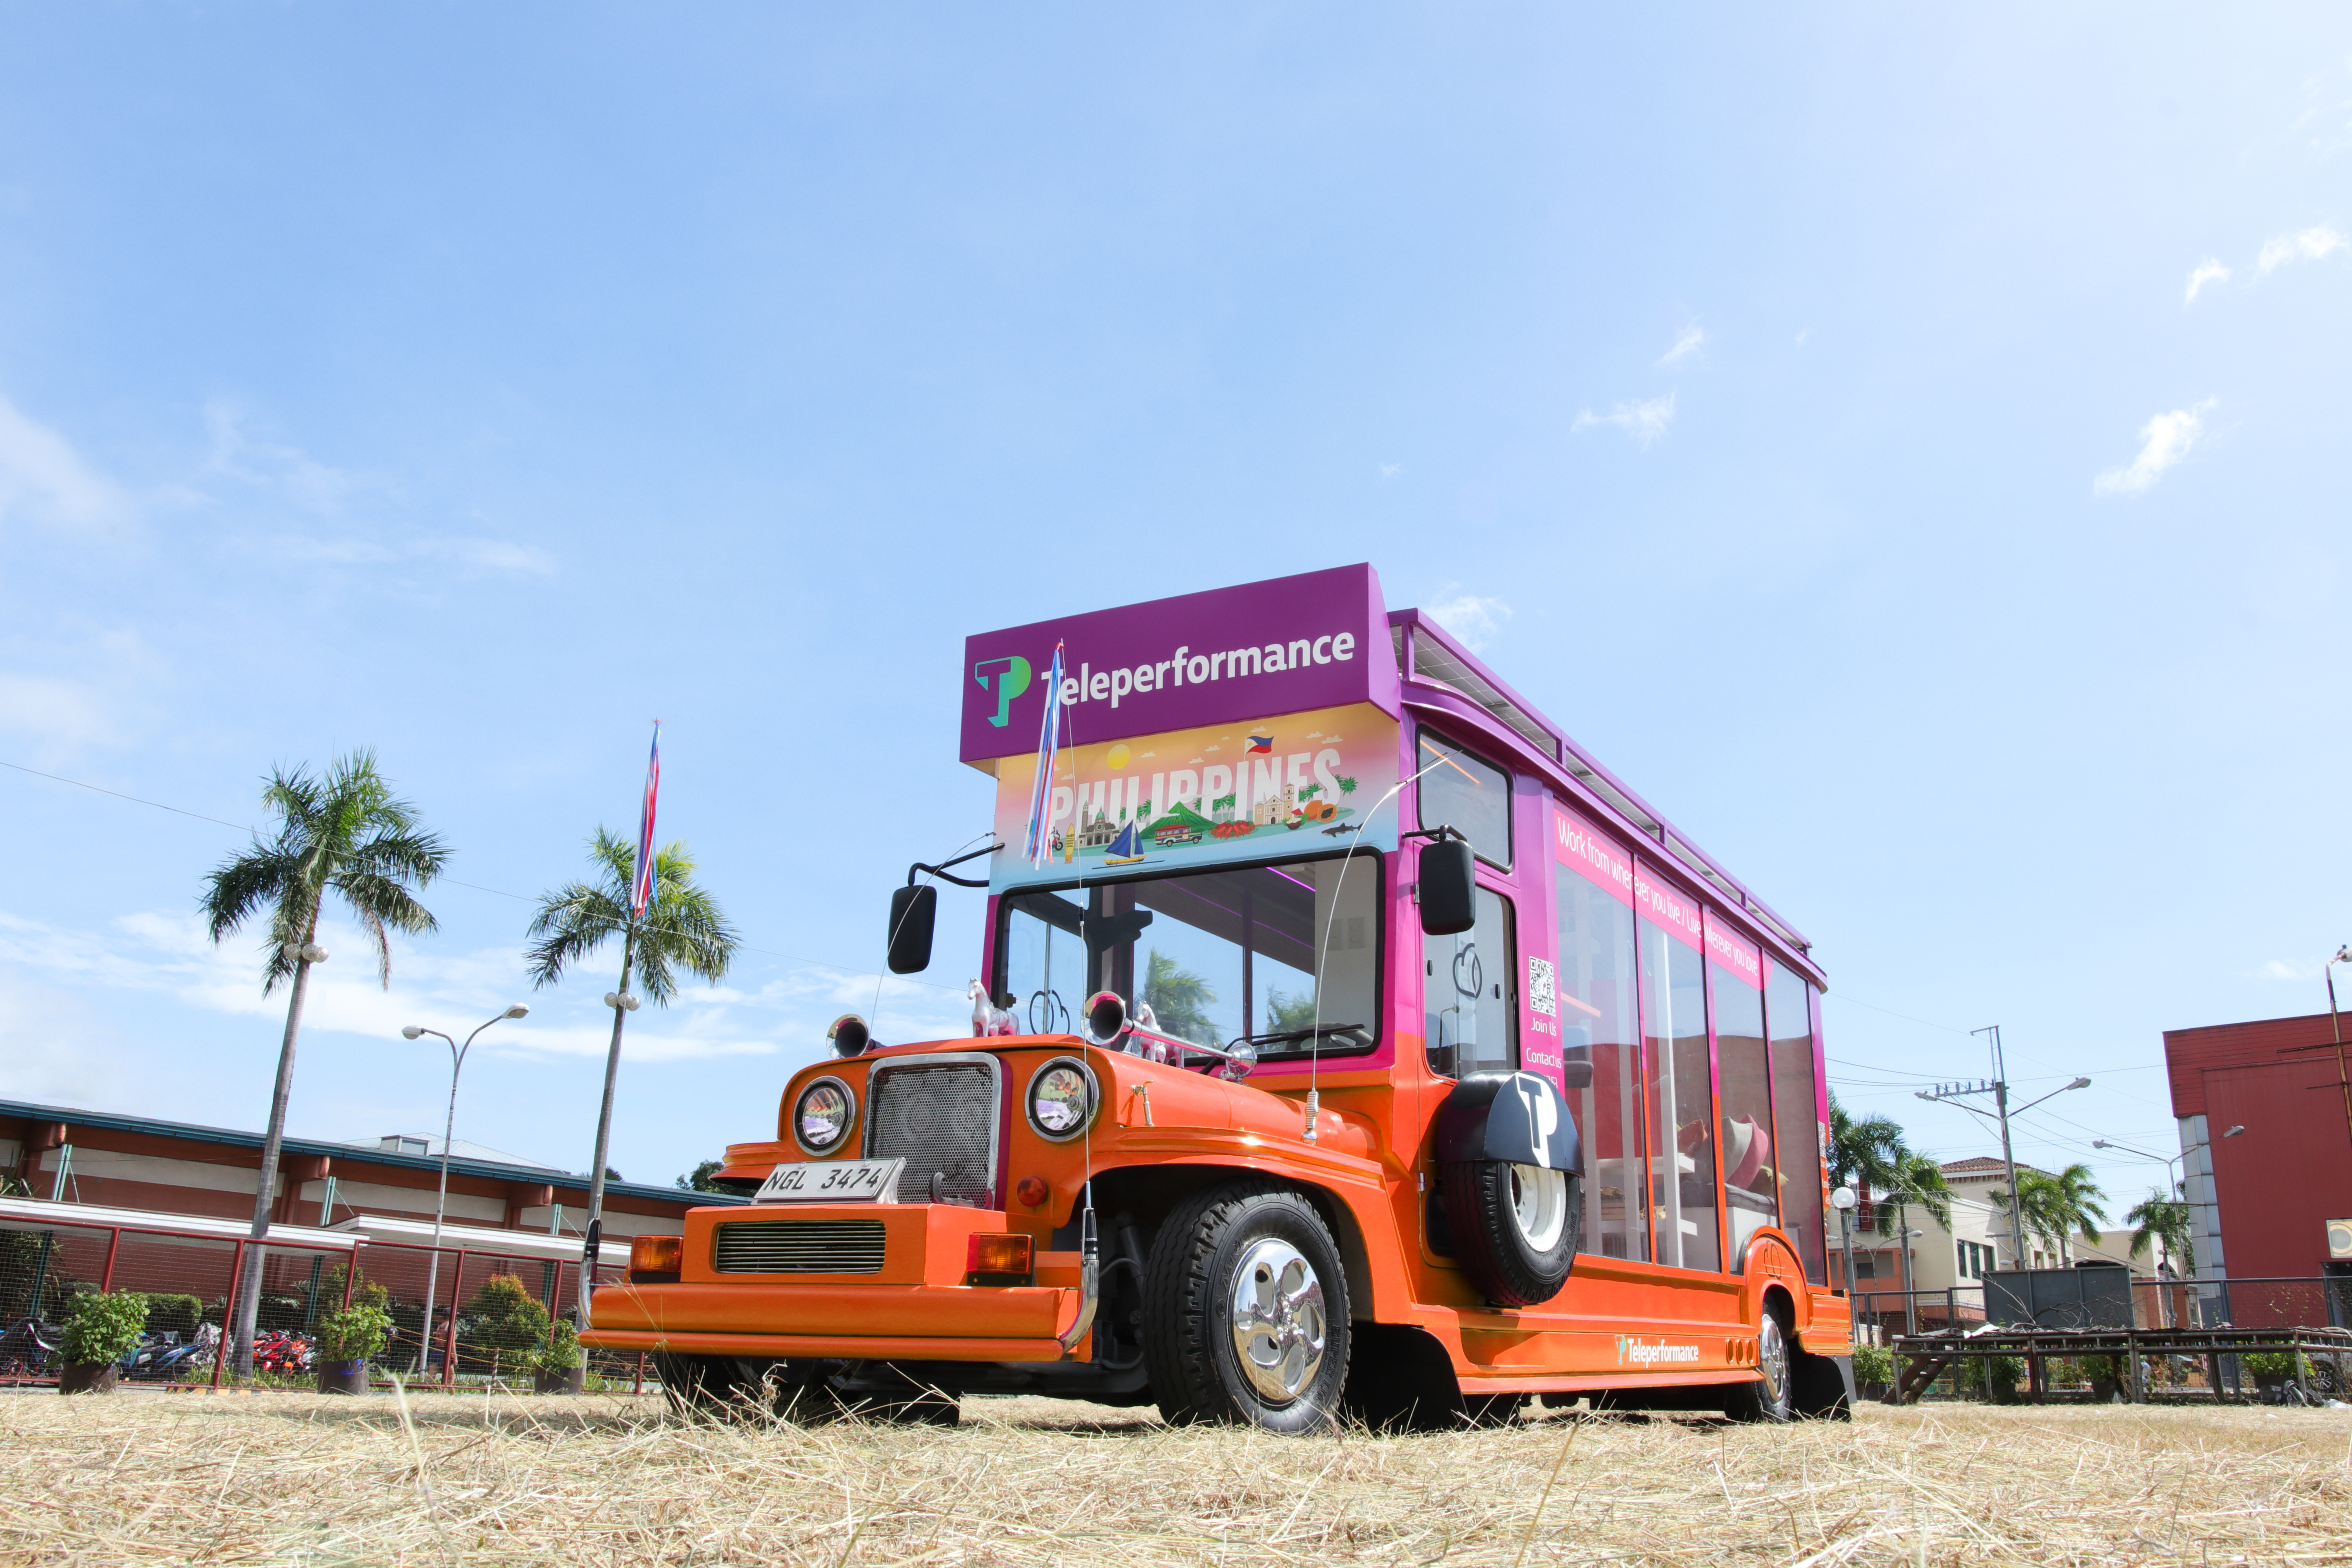 Teleperformance Promotes Work-at-Home Solution in Luzon with Cloud Campus Jeepney Roadshow